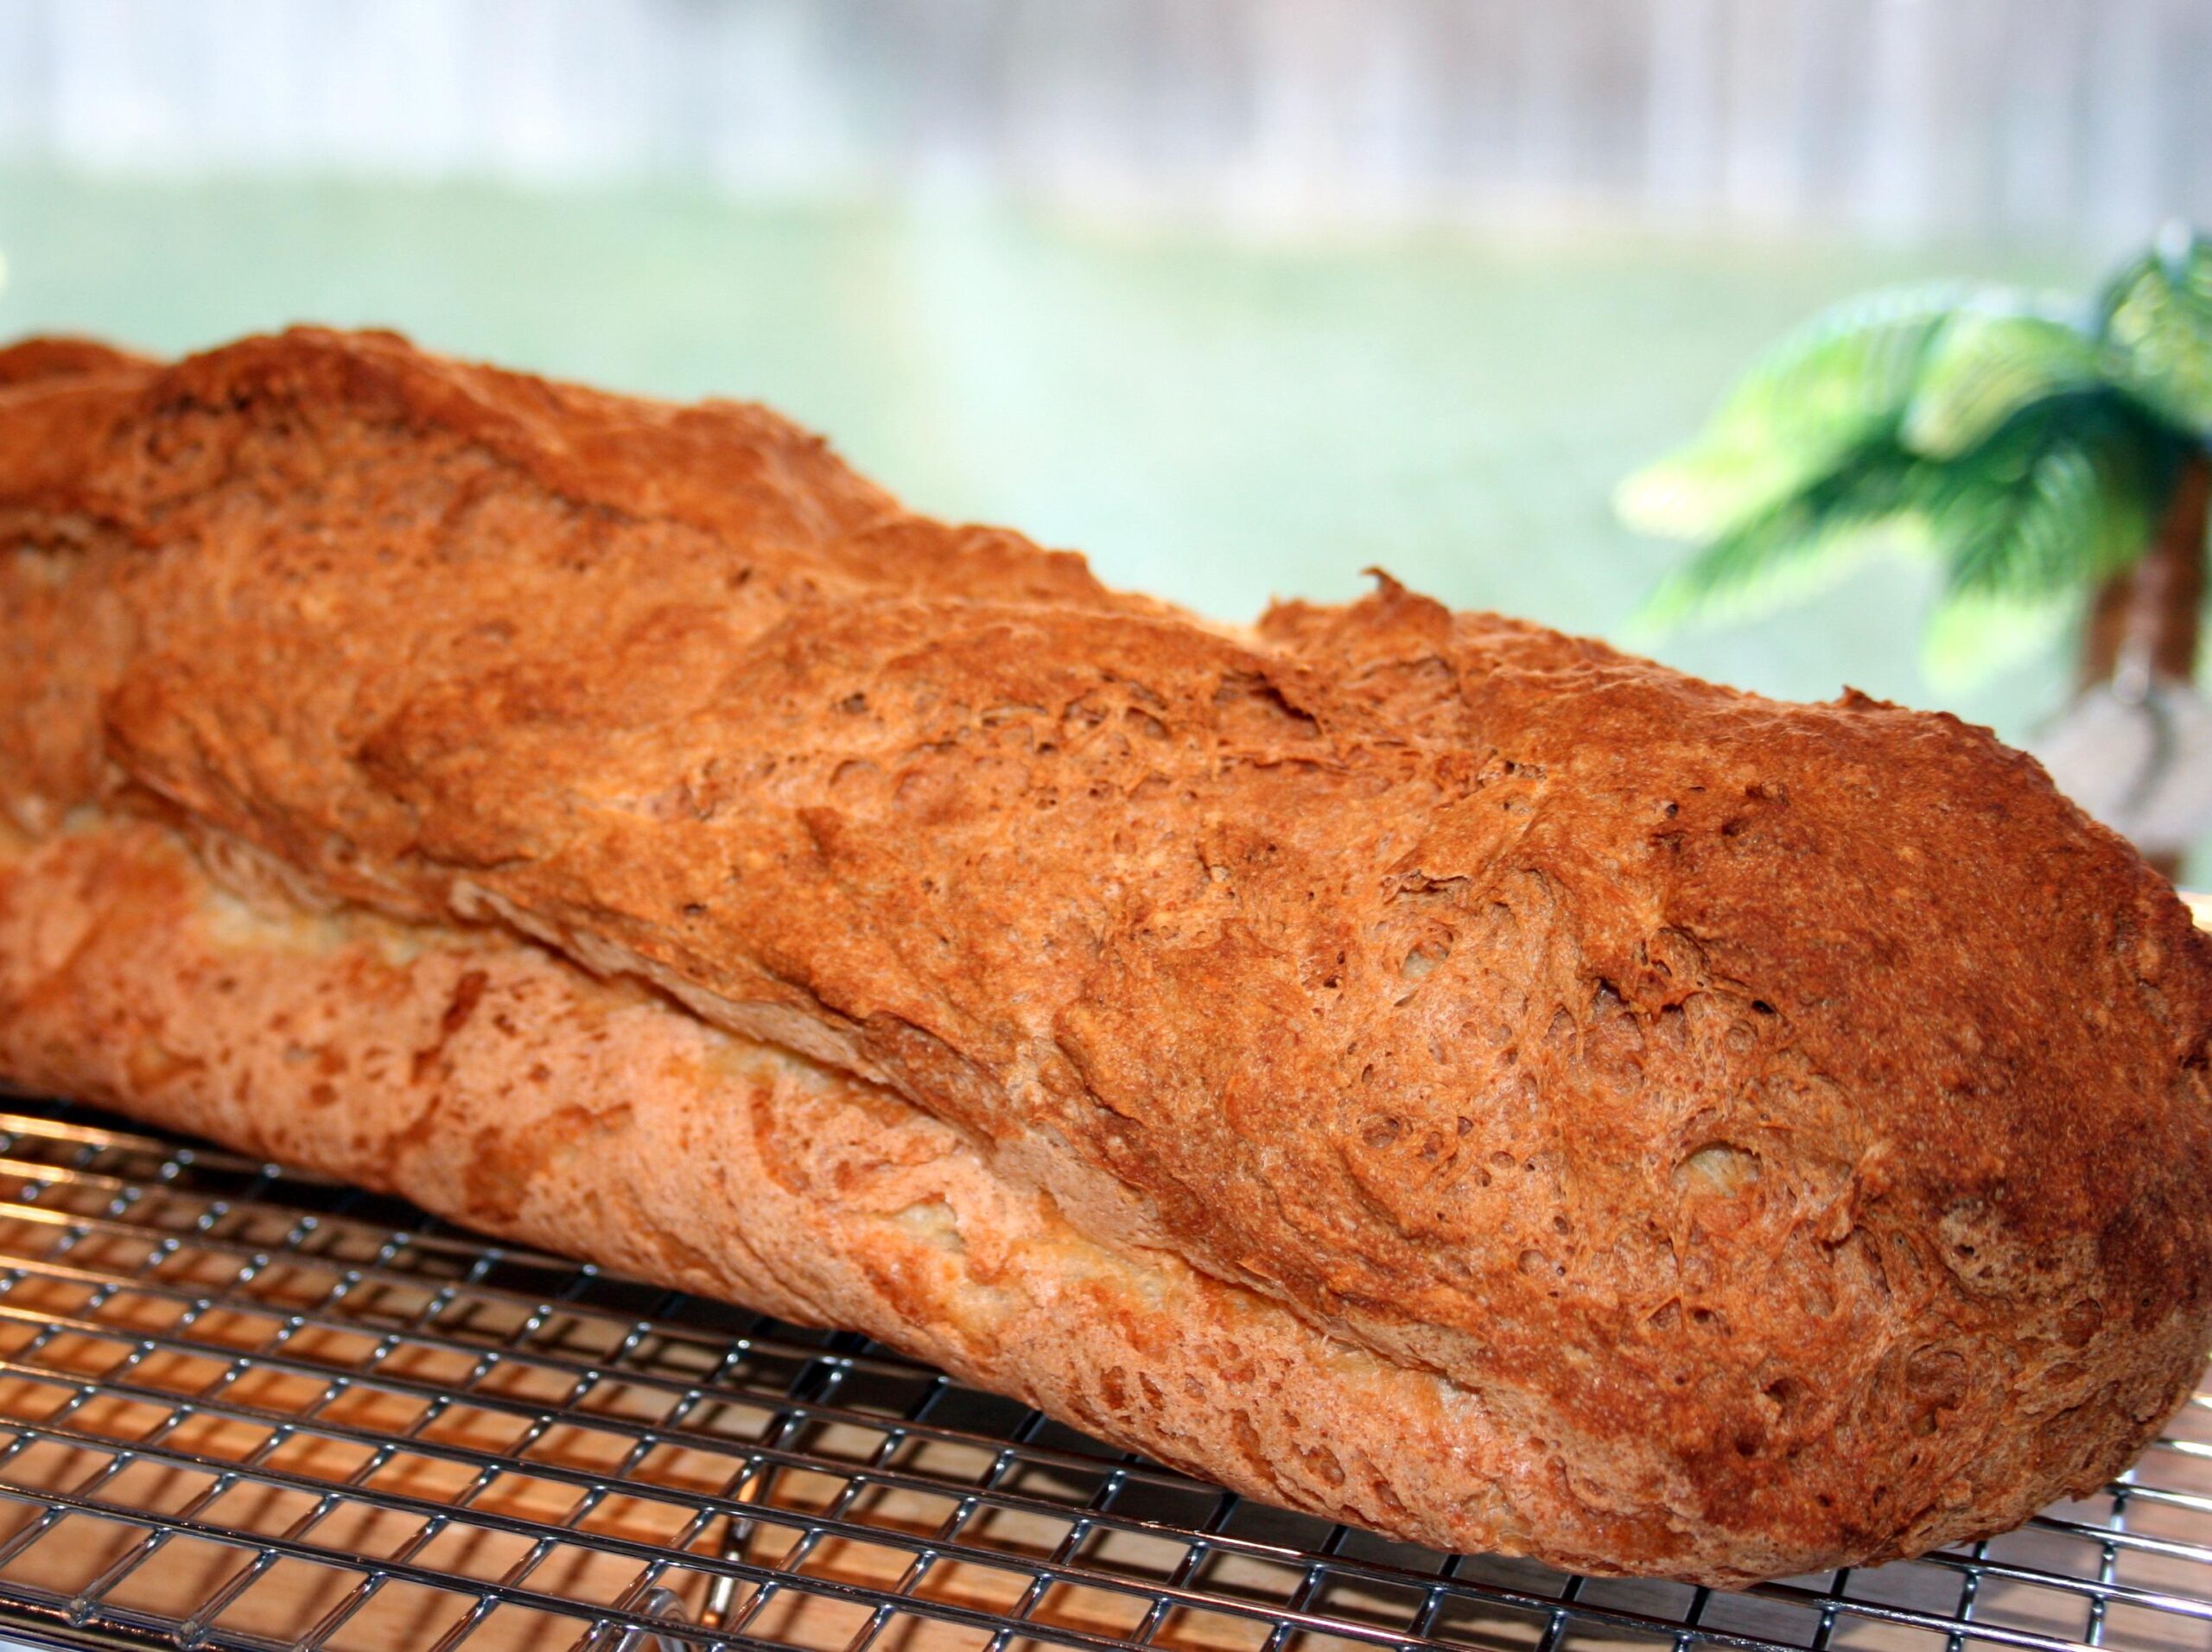 Try our guilt-free fat-free French bread recipe